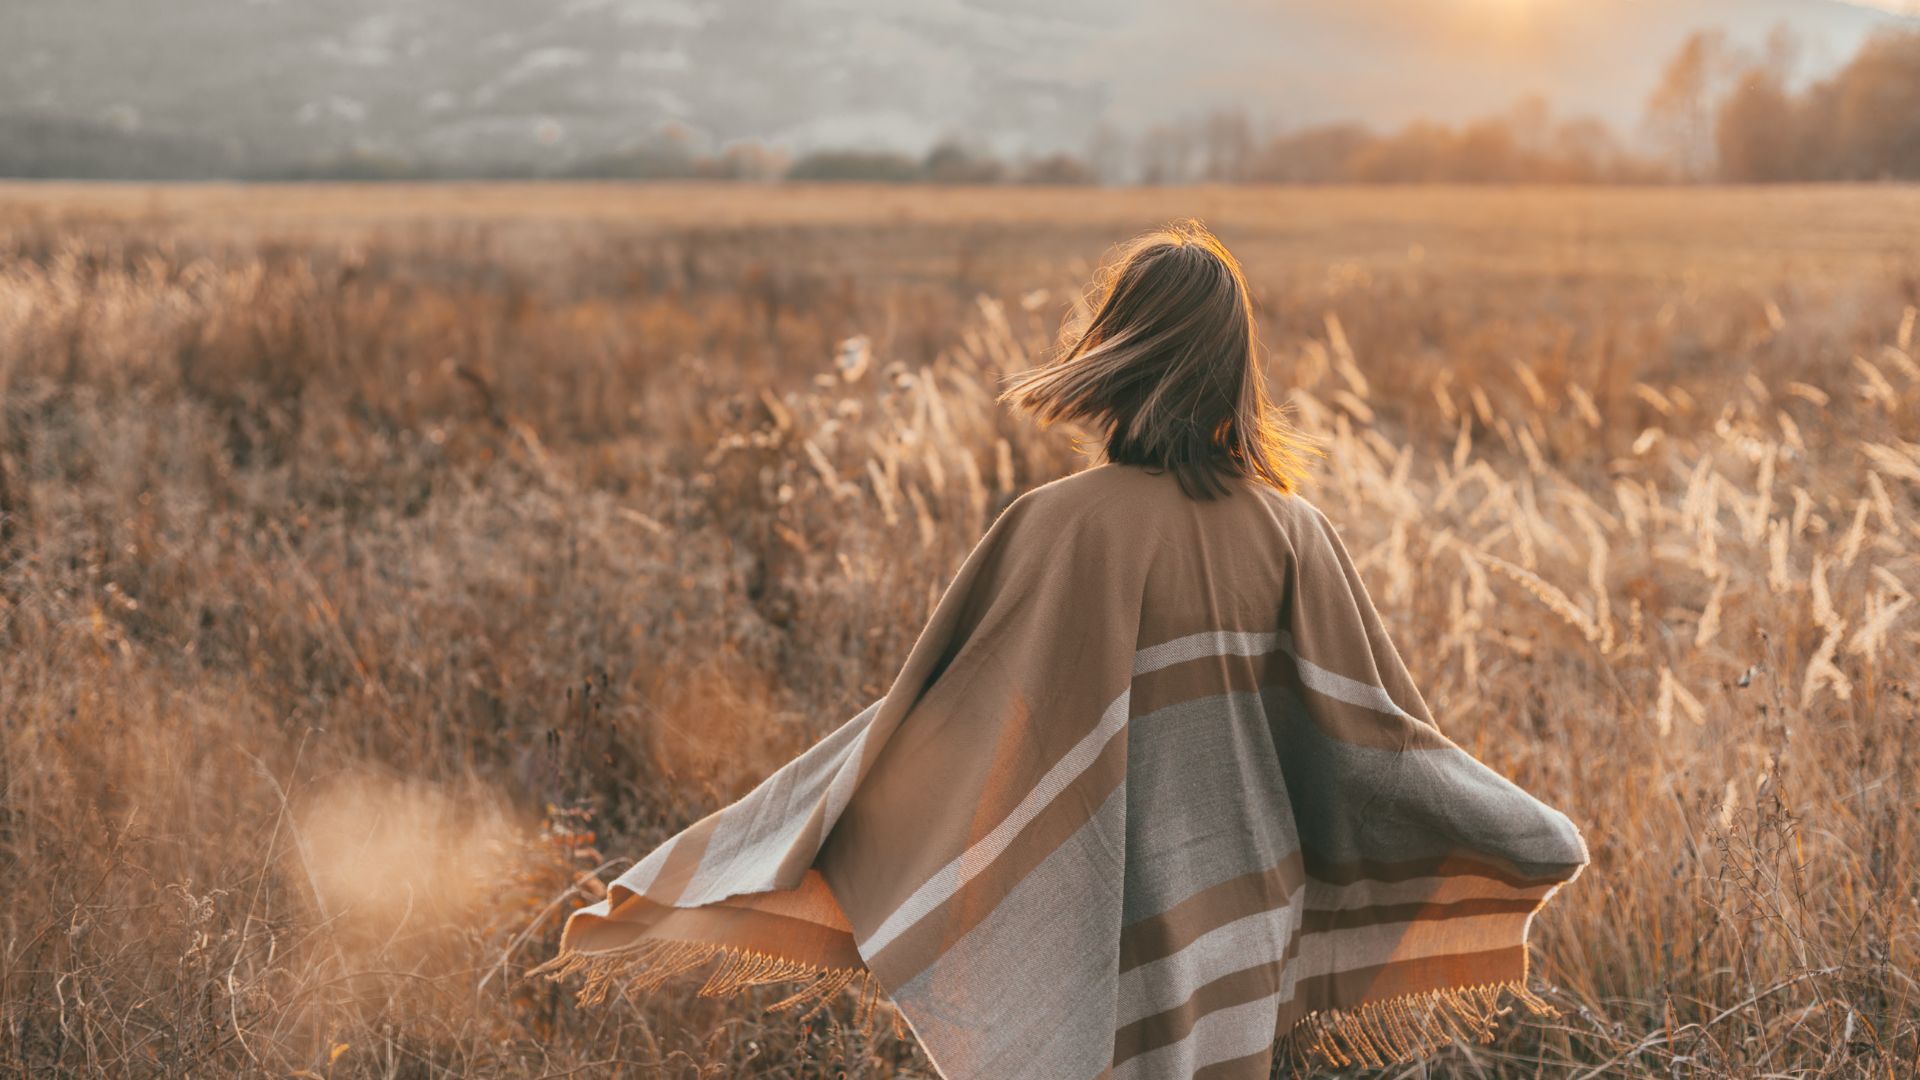 Girl In Poncho Alone In Field During Sunset